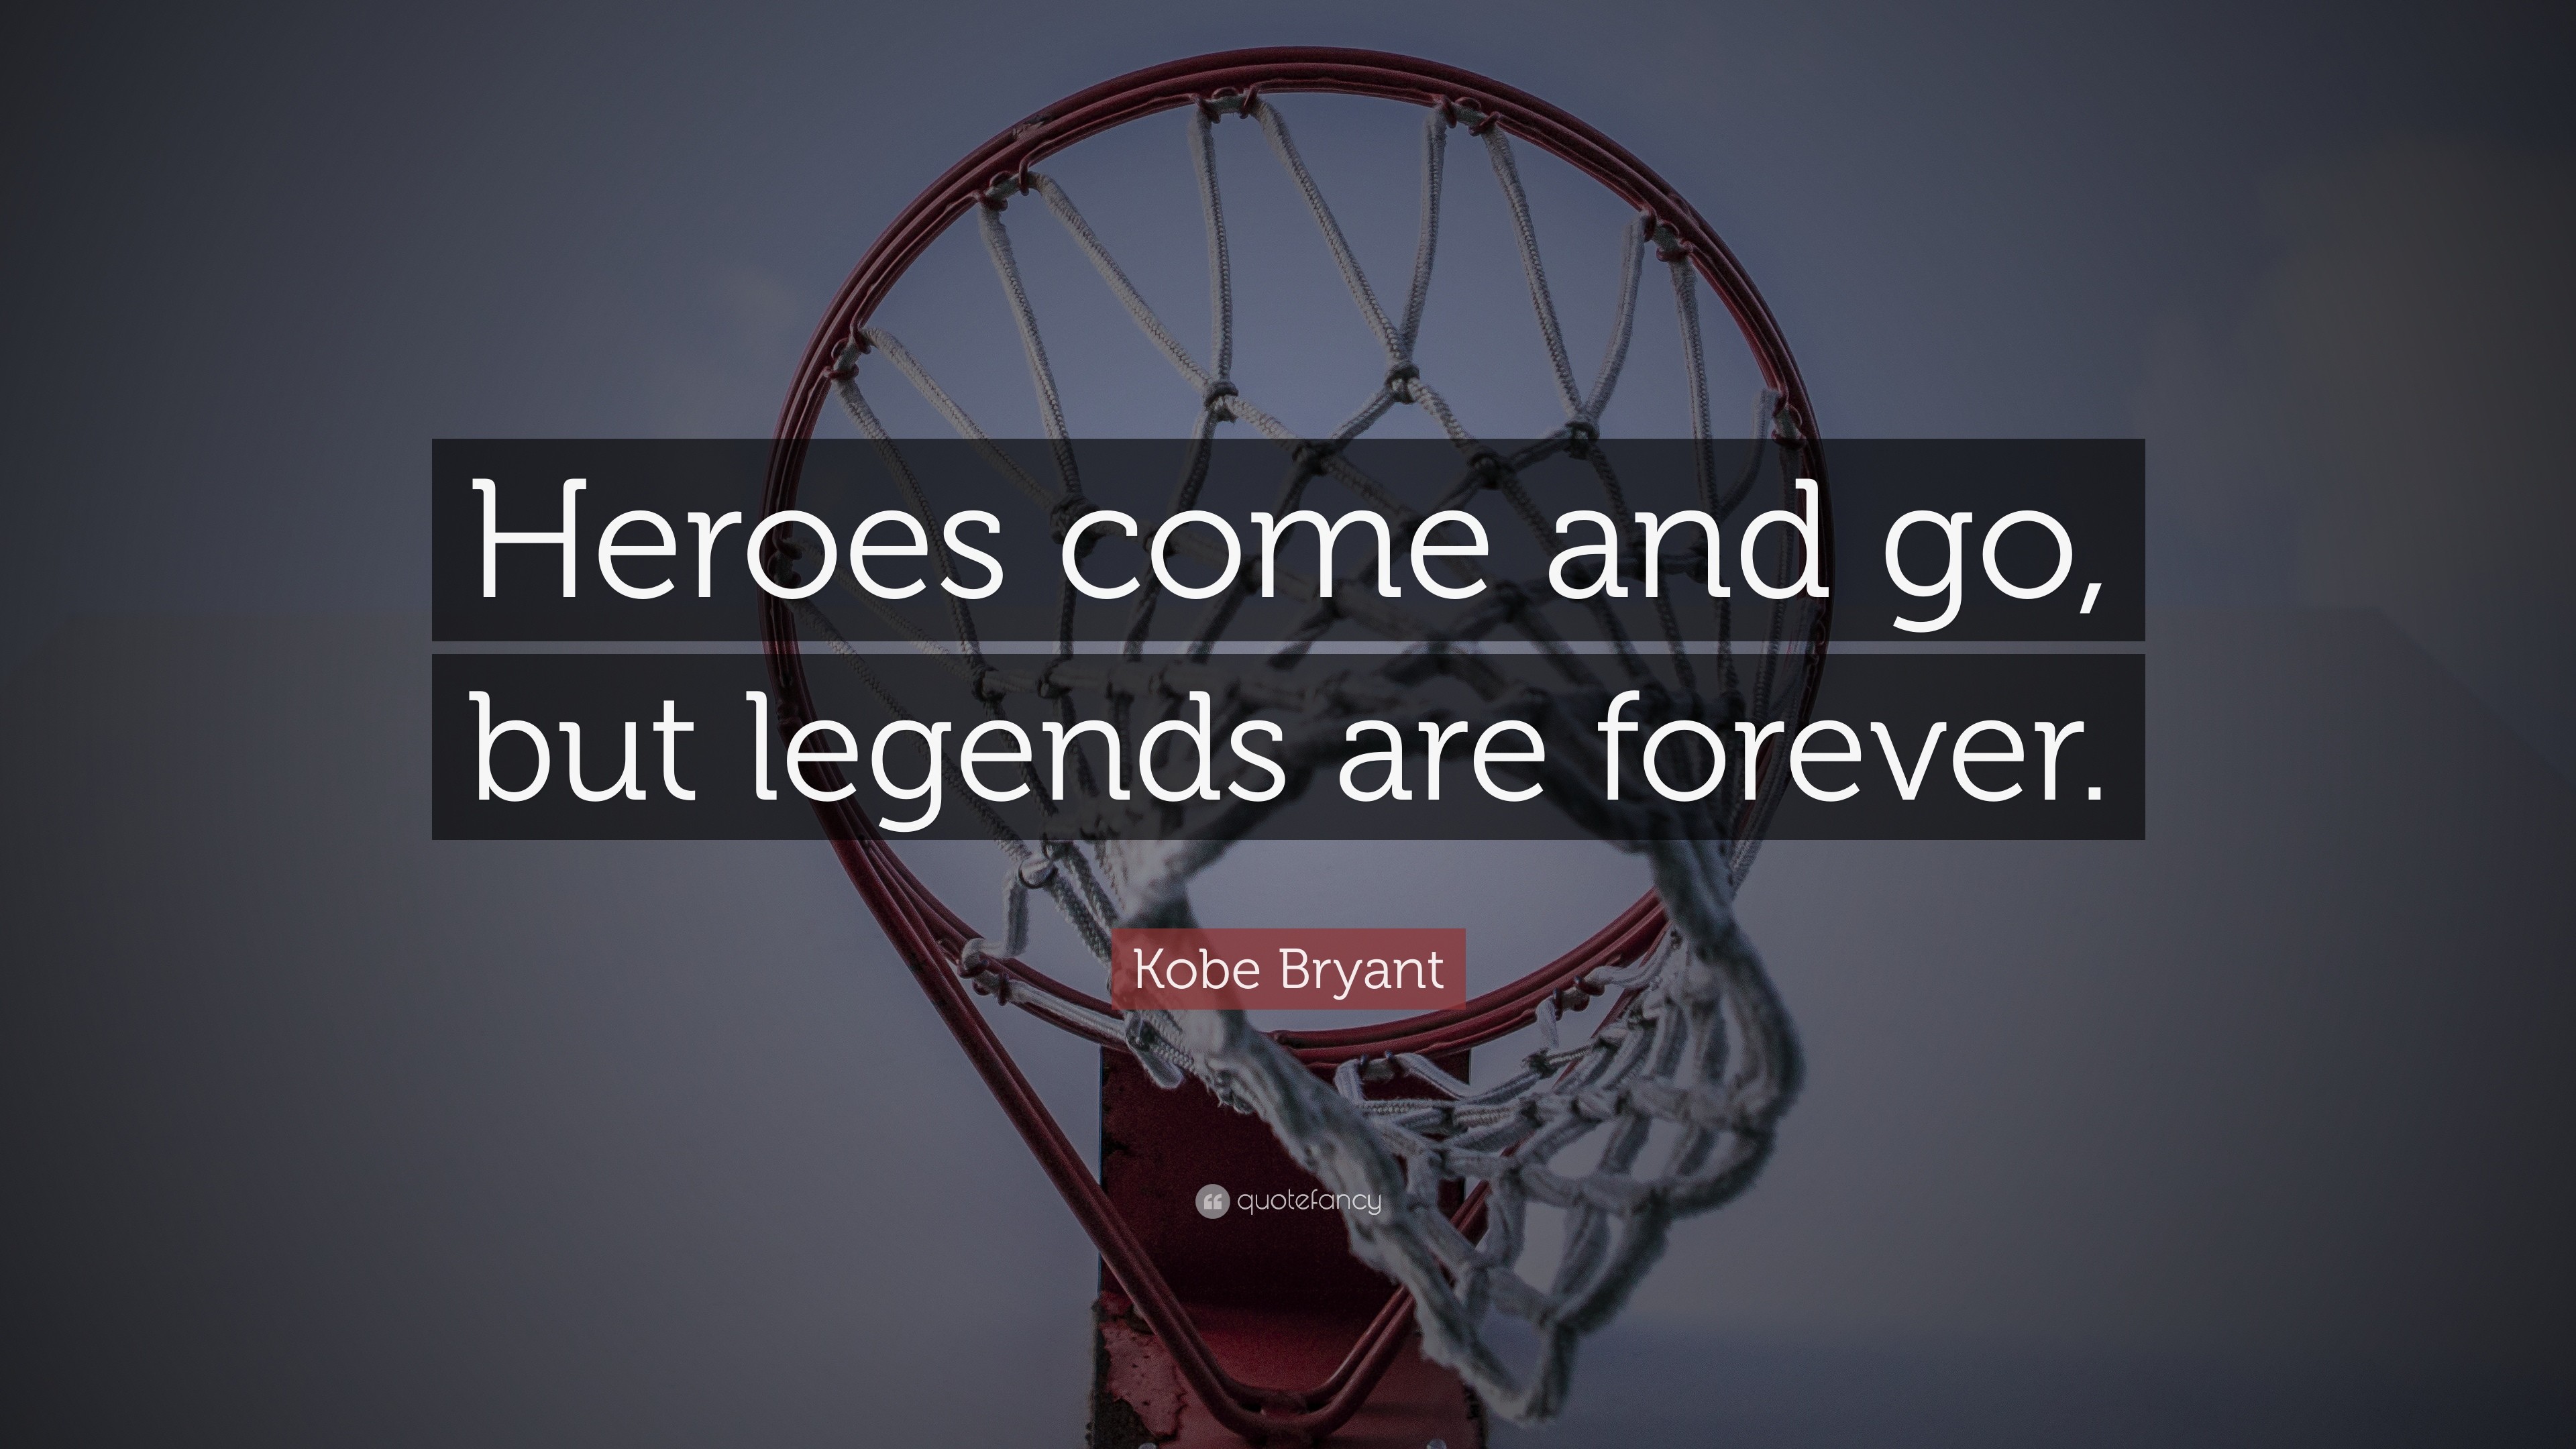 3840x2160 Kobe Bryant Quote: “Heroes come and go, but legends are forever.”